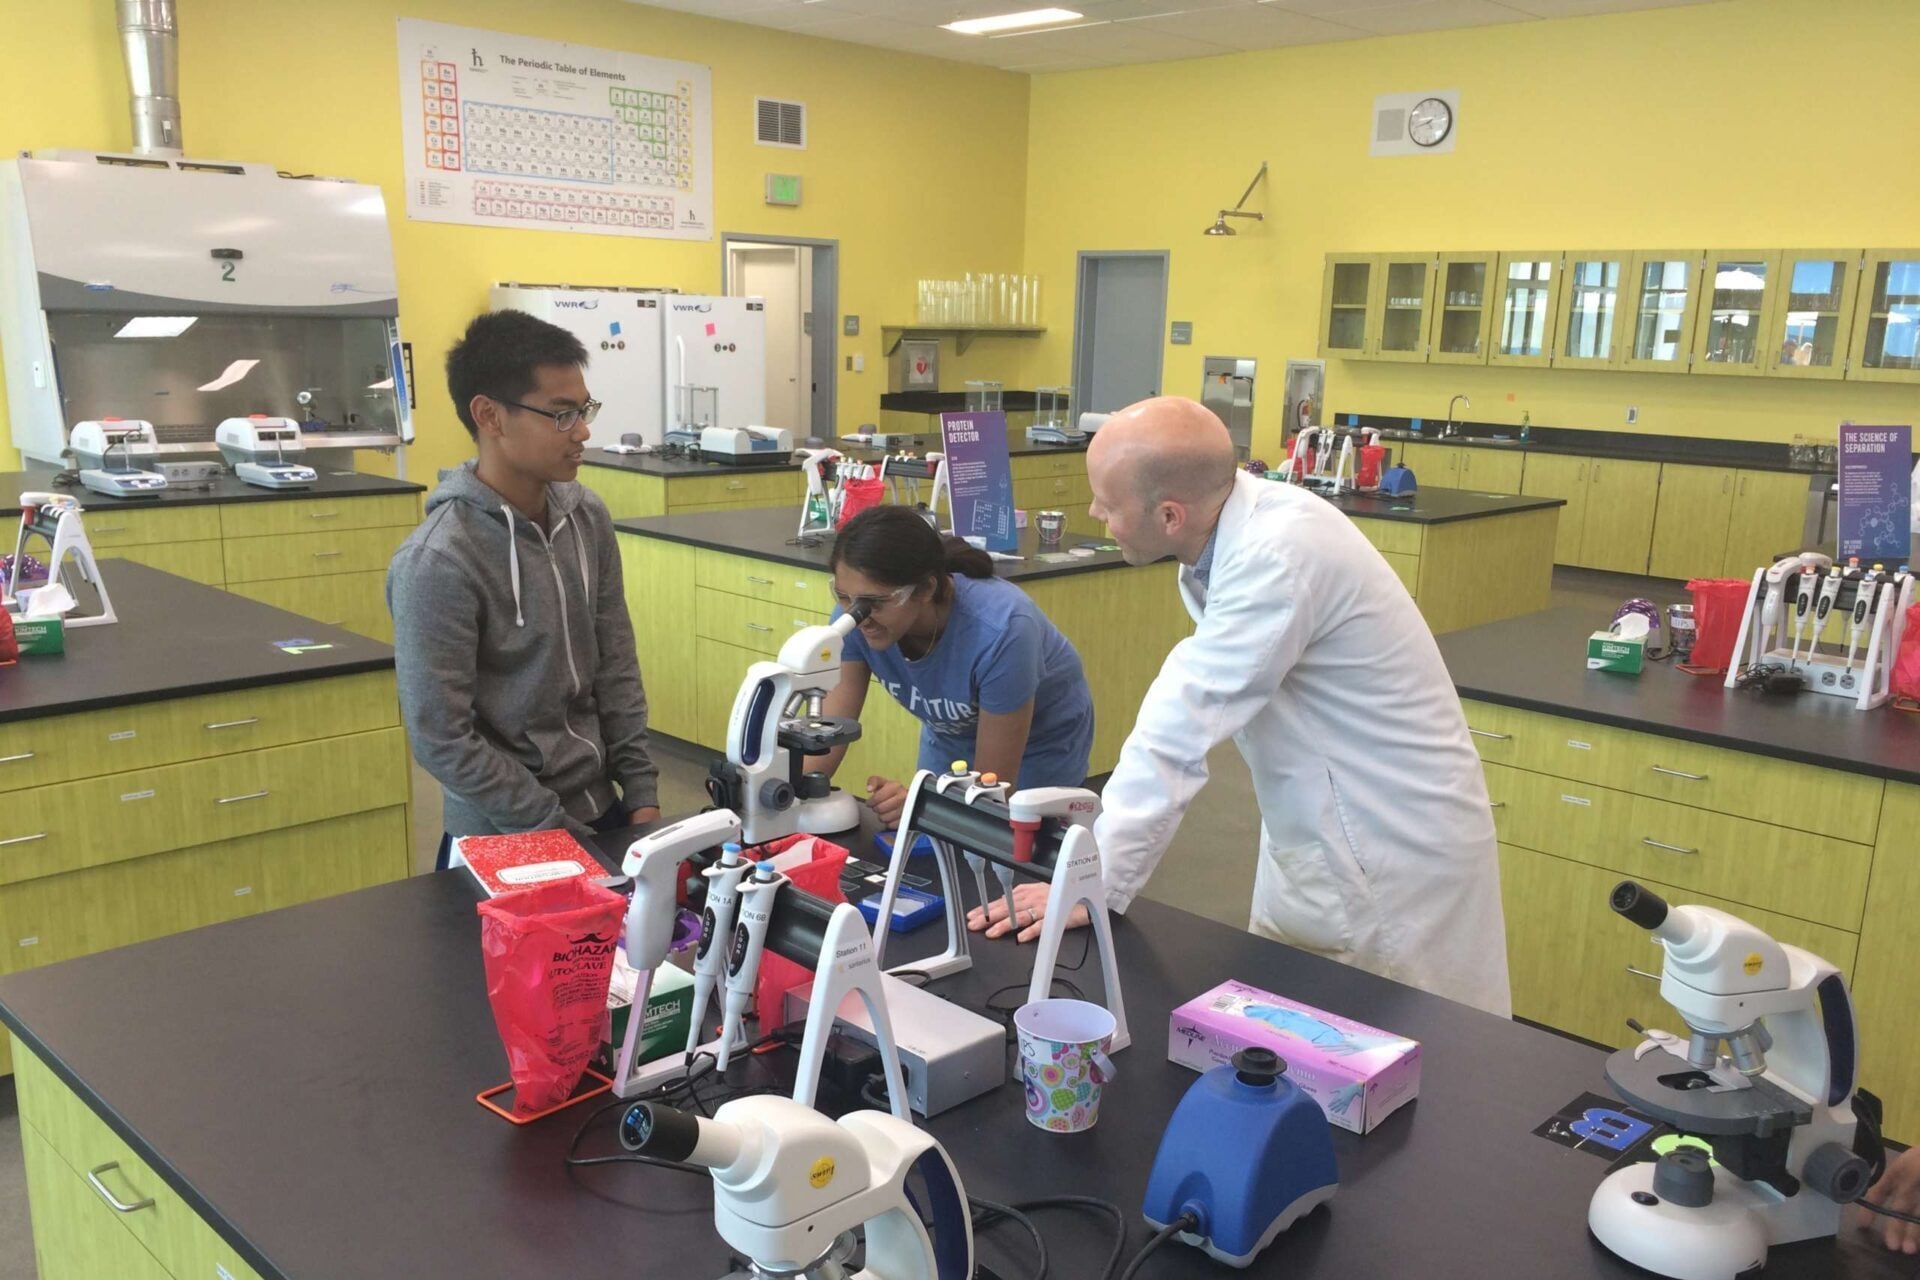 Students and a teacher using a microscope at the Science Garage at South San Francisco High School